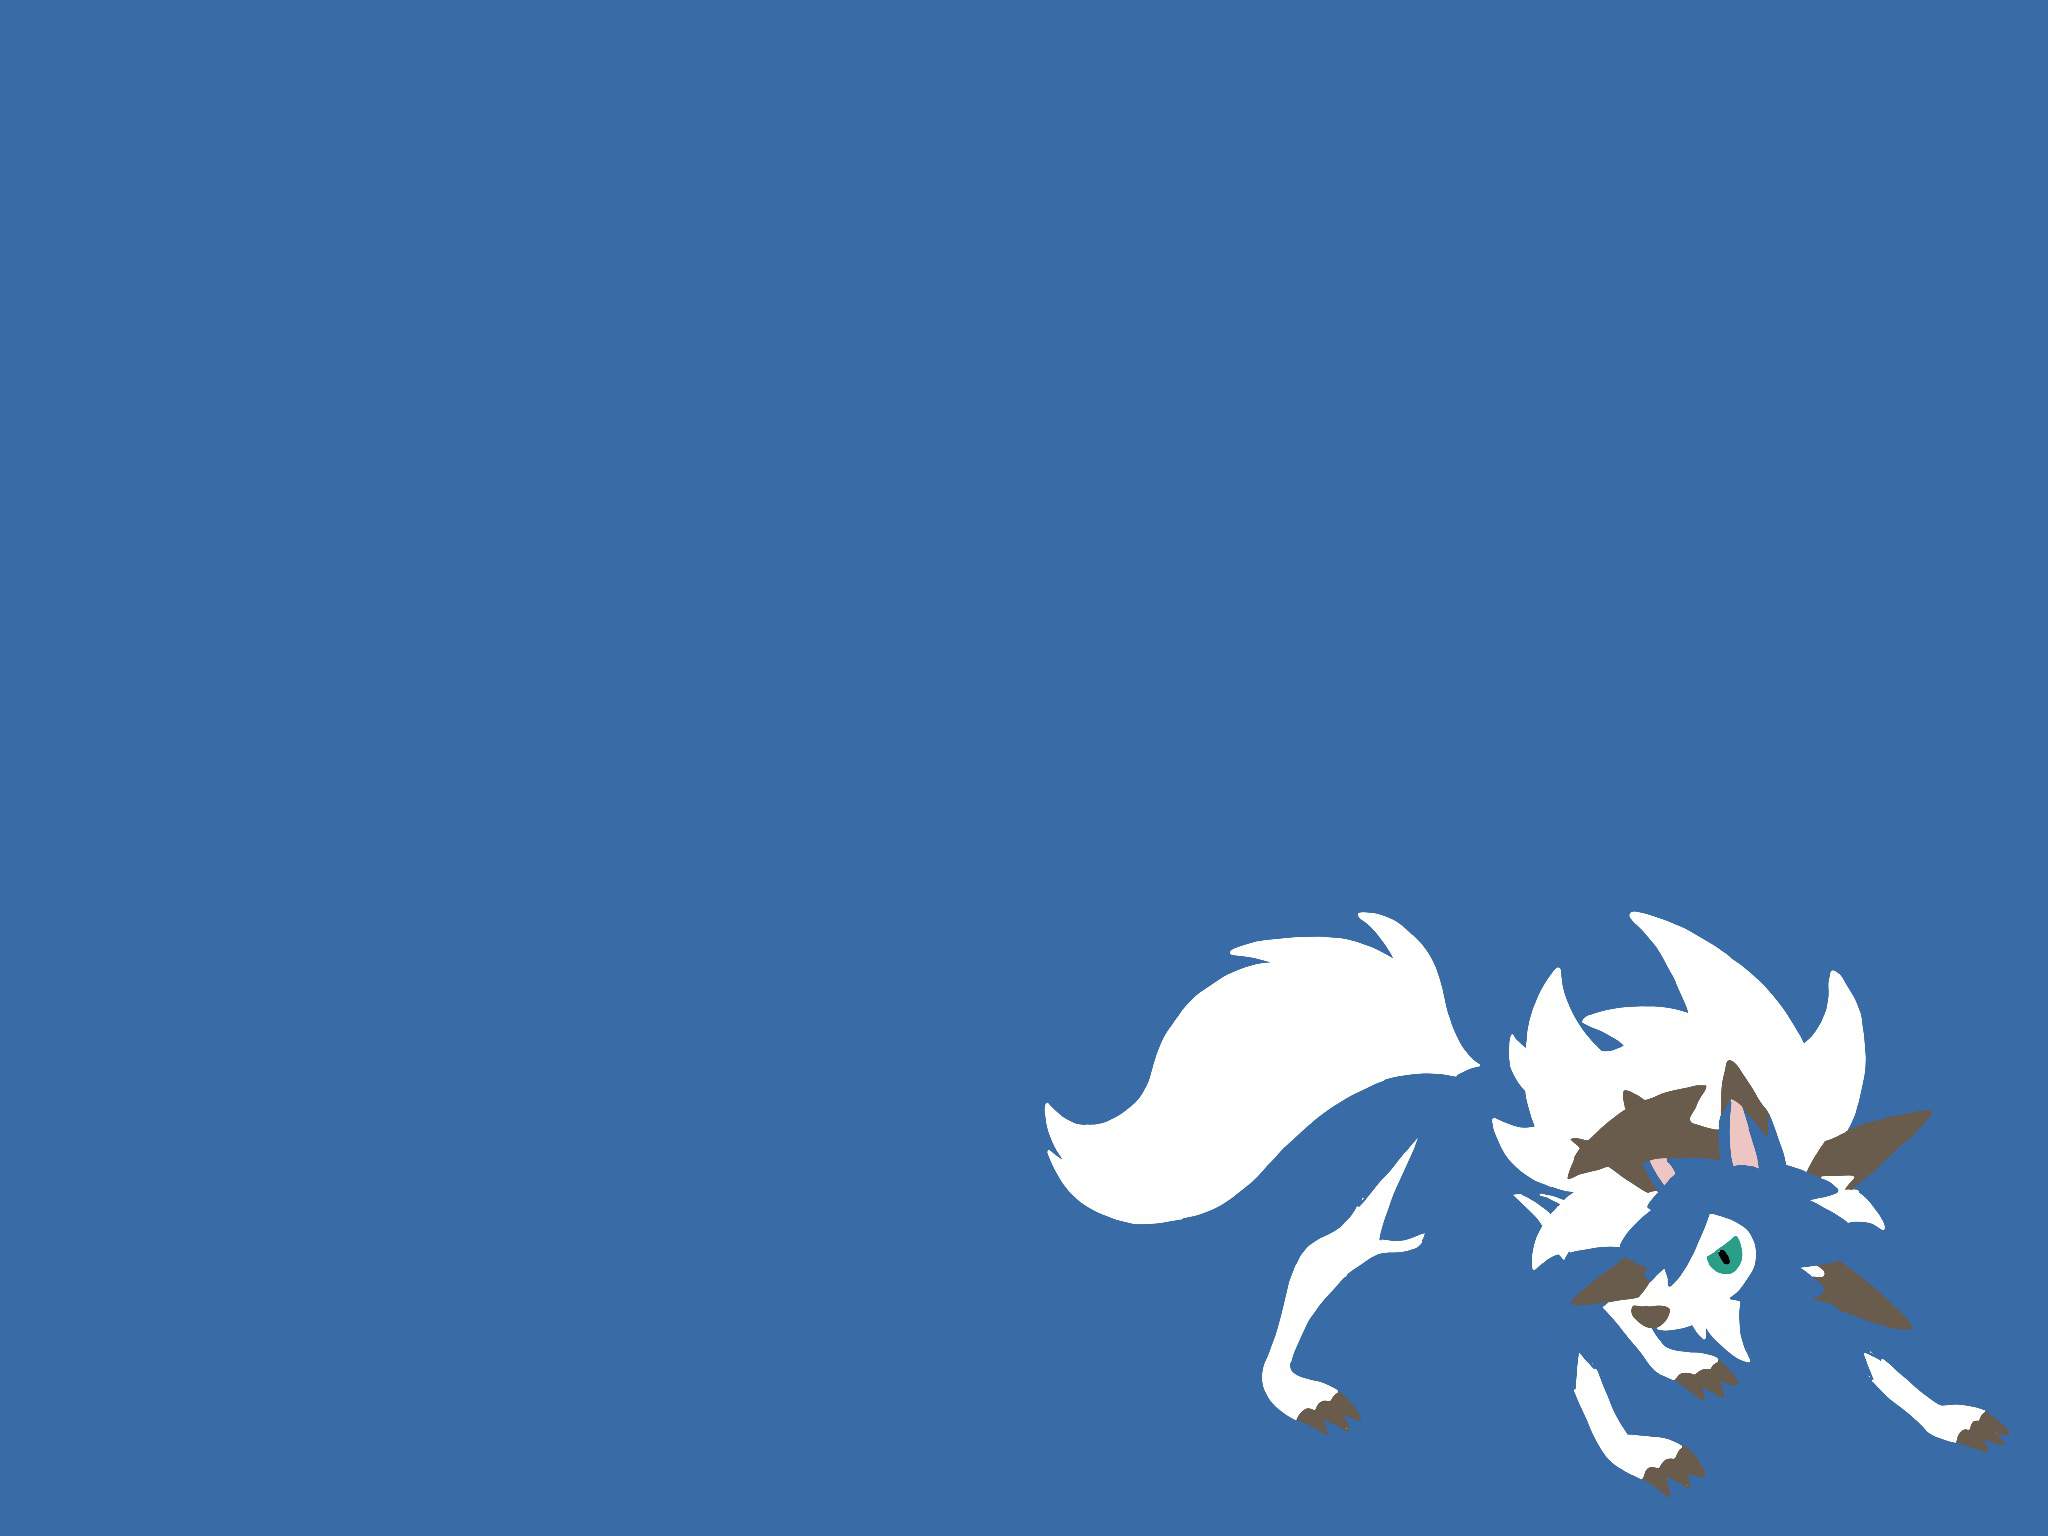 Image: Shiny Lycanroc Wallpapers - Top Free Shiny Lycanroc Backgrounds